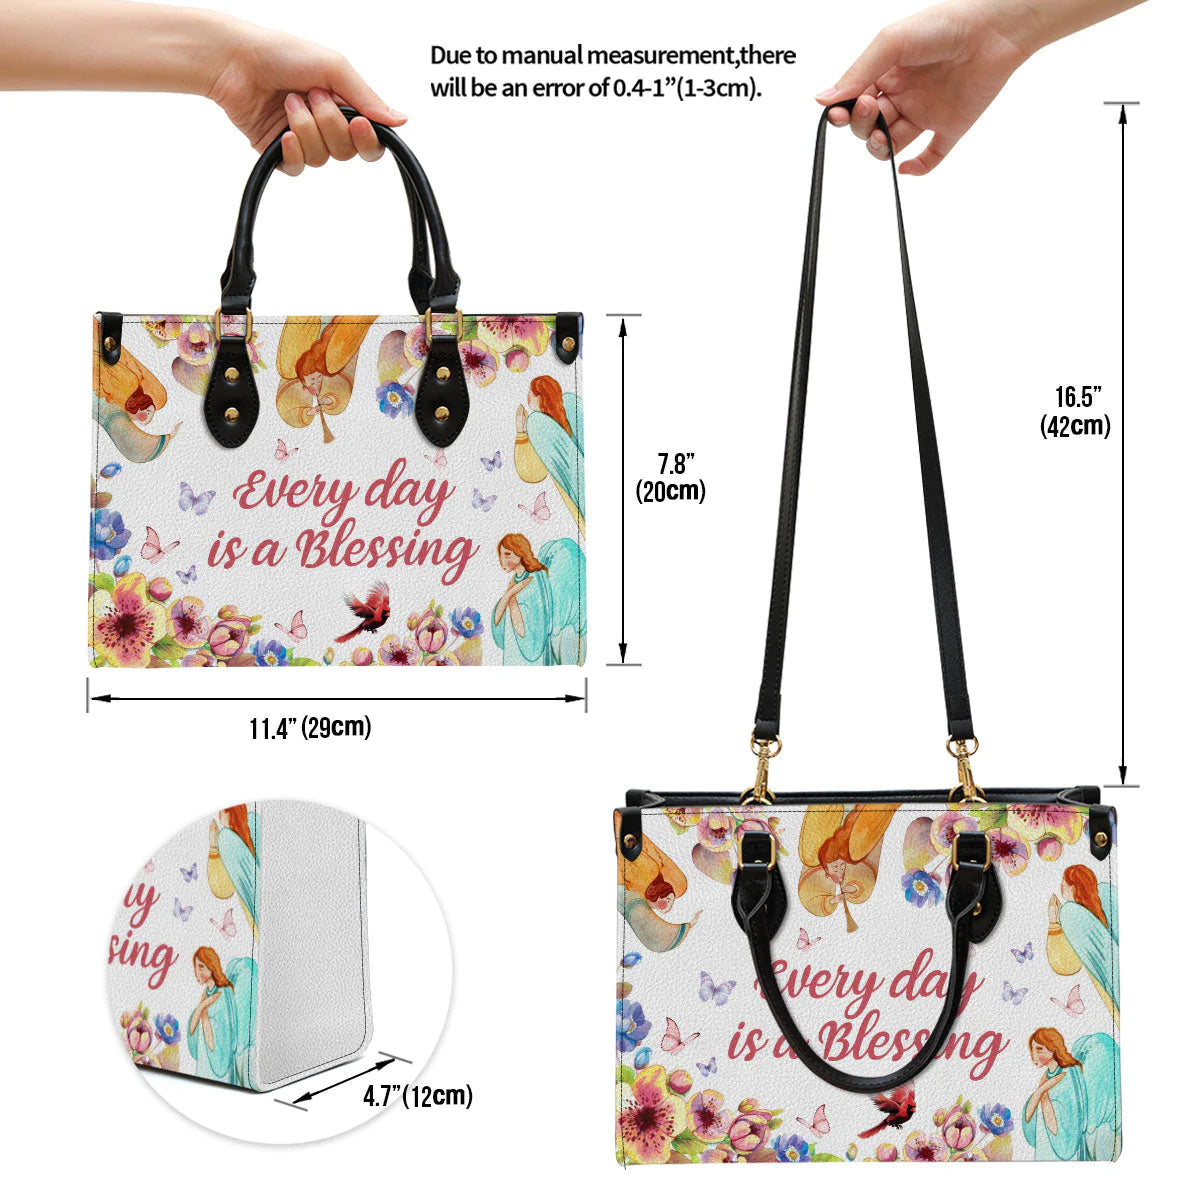 Christianartbag Handbag, Every Day Is A Blessing, Personalized Gifts, Gifts for Women, Christmas Gift. - Christian Art Bag